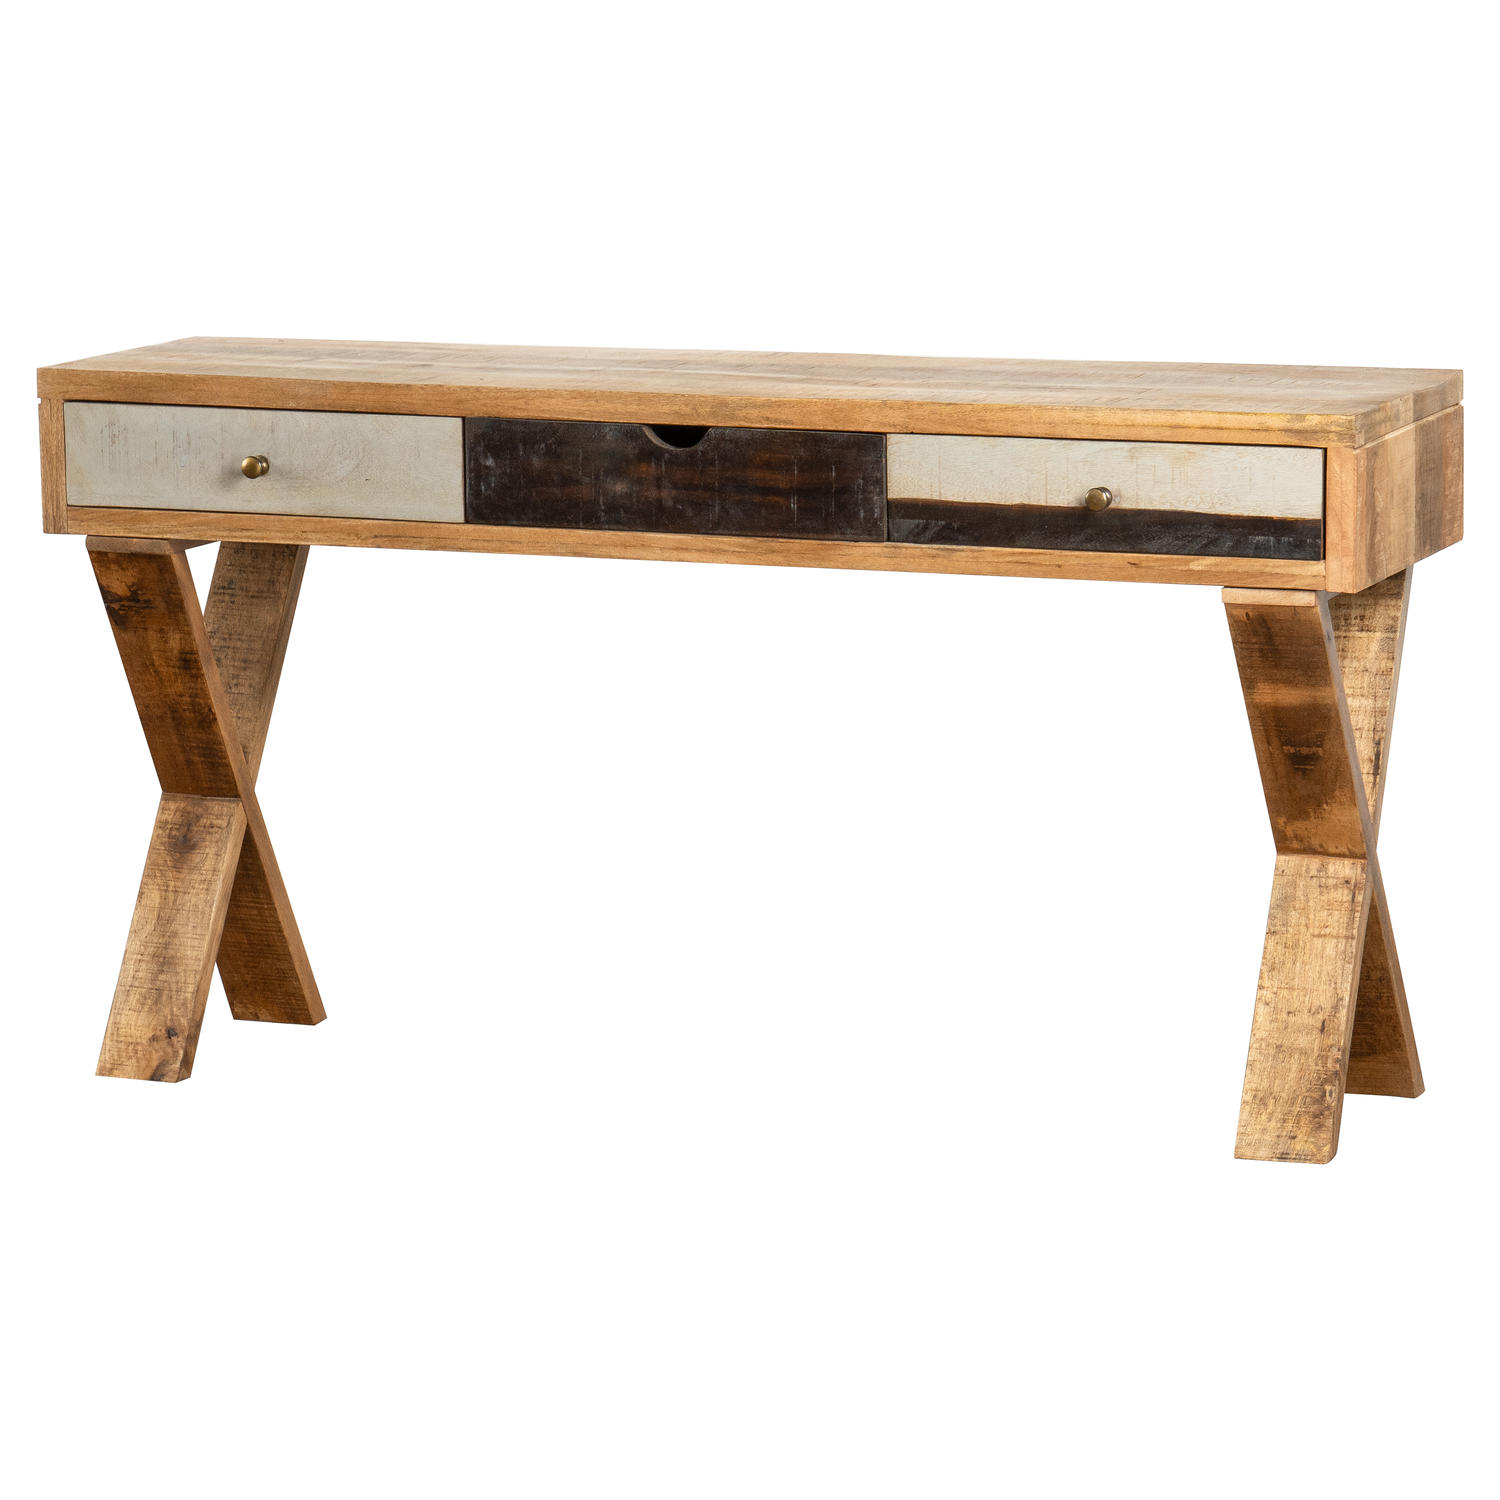 Reclaimed Industrial Console With Cross Leg - Image 1